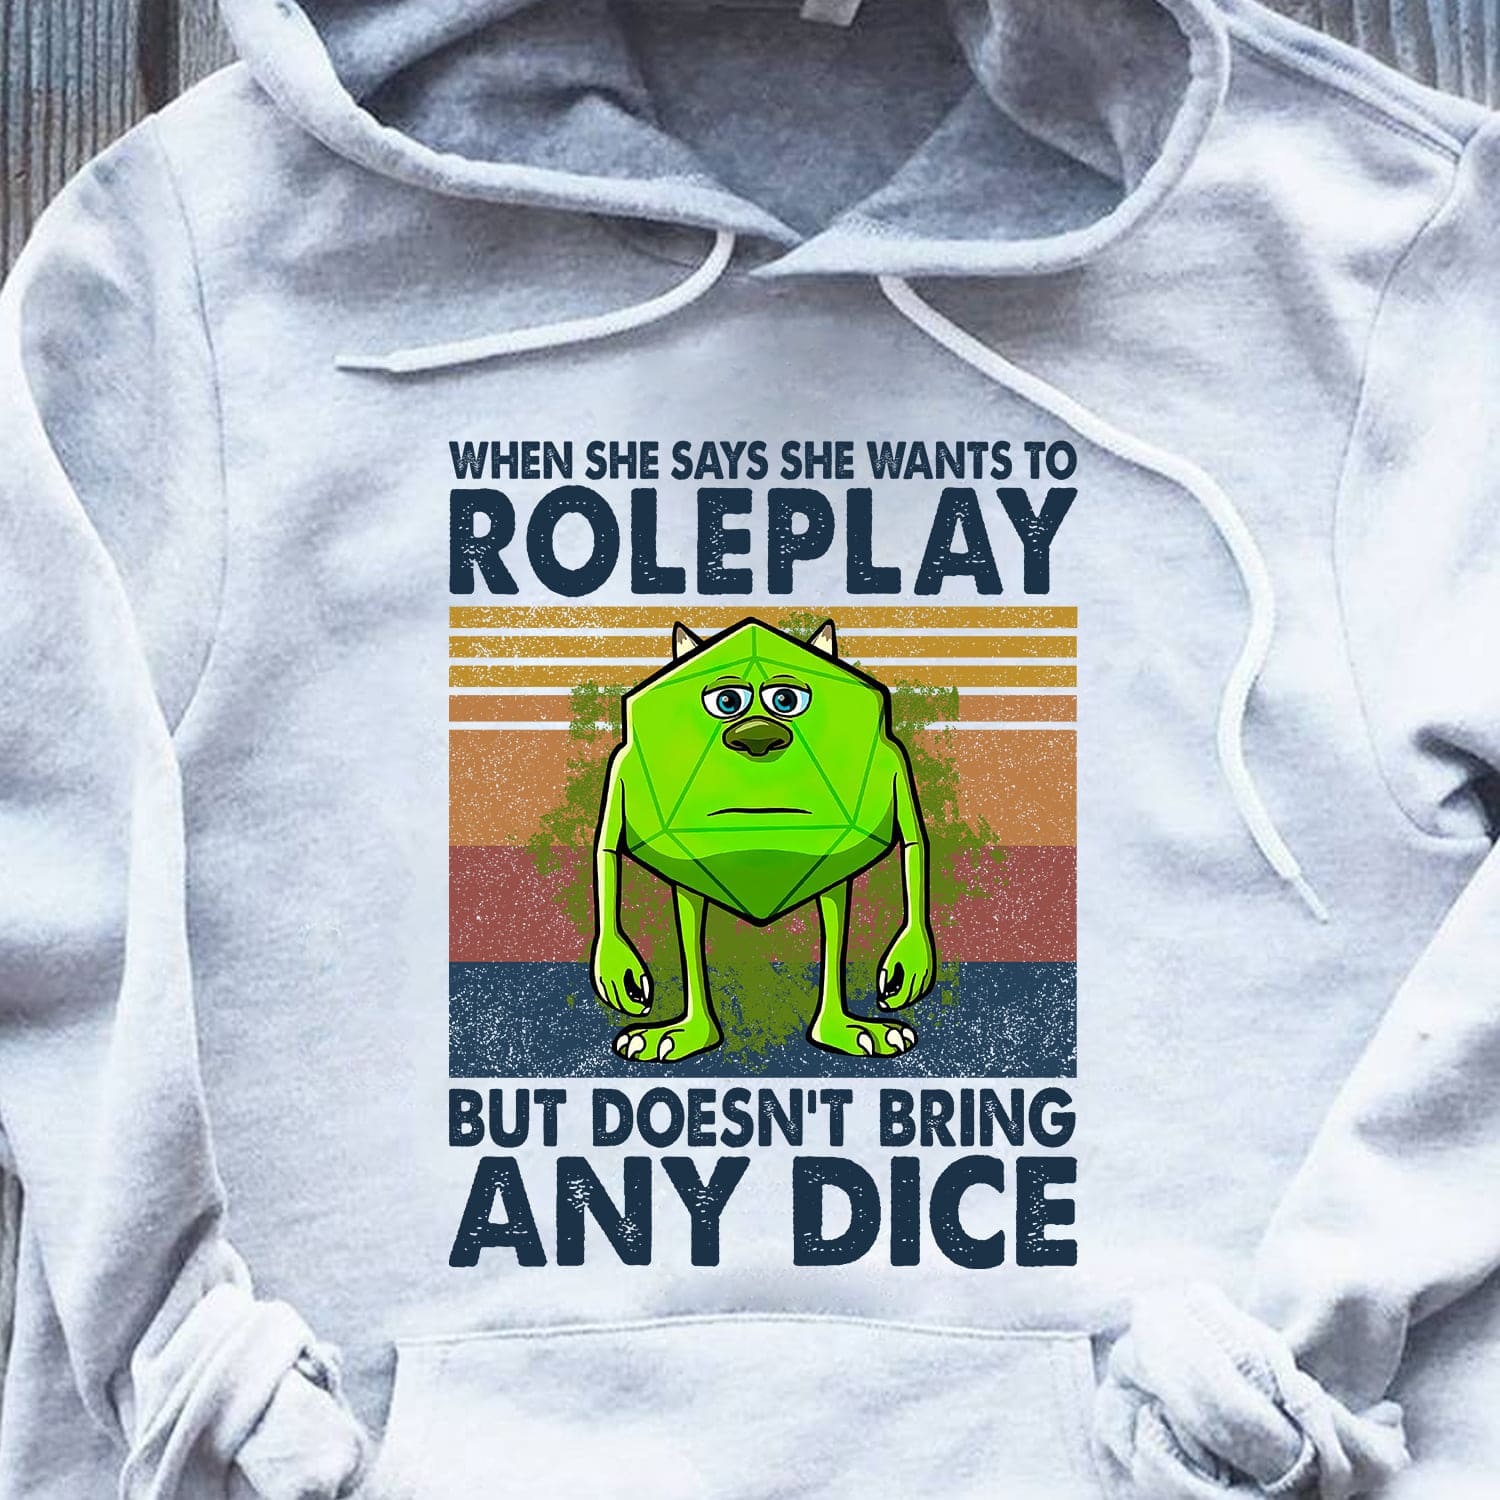 When she says she wants to roleplay but doesn't bring any dice - Mike Wazowski funny T-shirt, Dungeons and Dragons